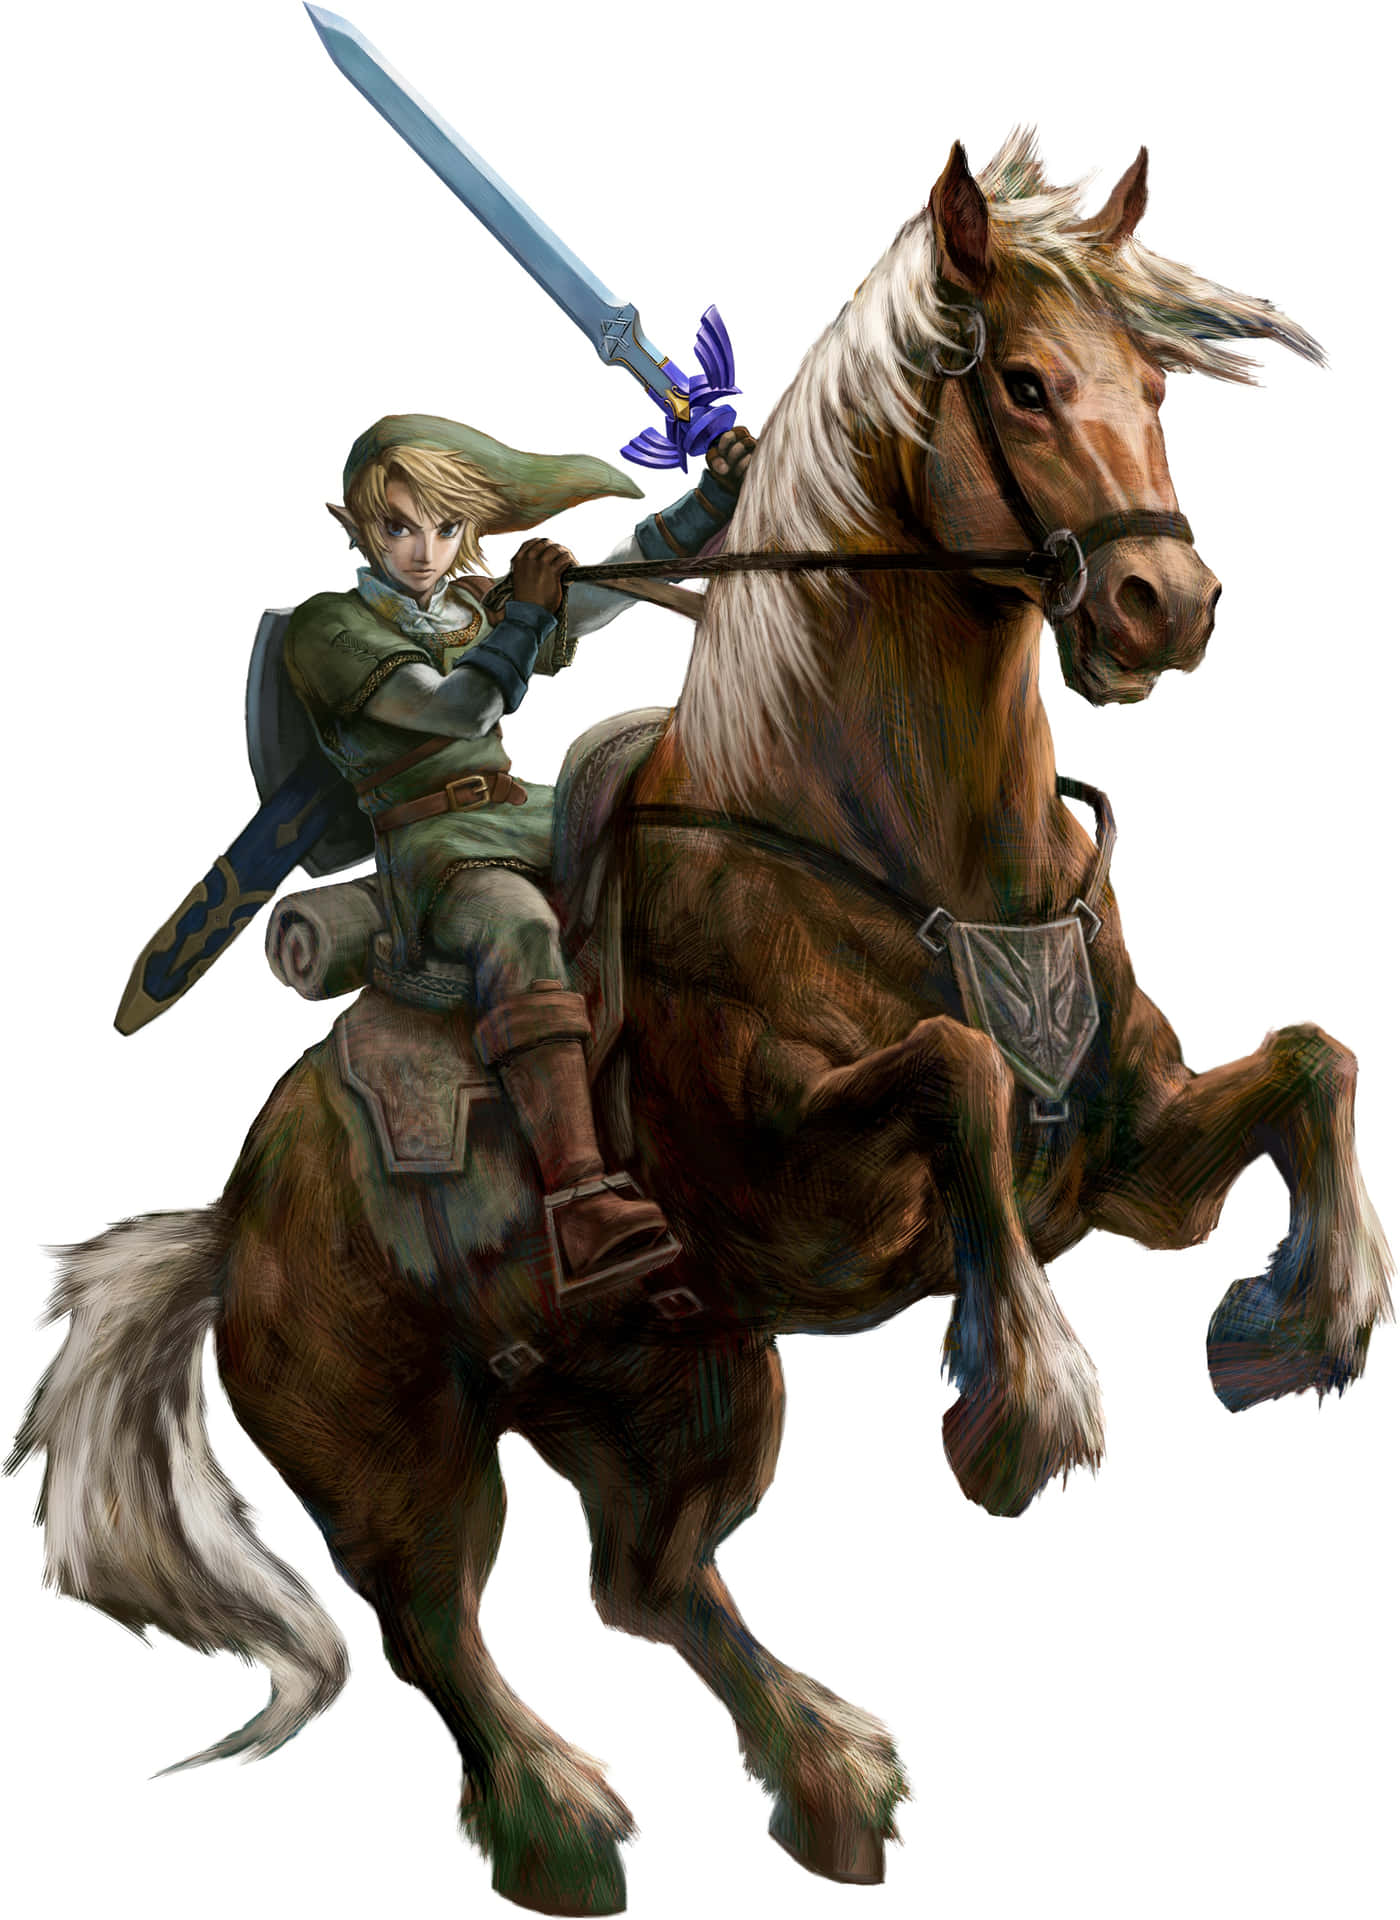 Link and Epona riding through Hyrule in The Legend of Zelda Wallpaper